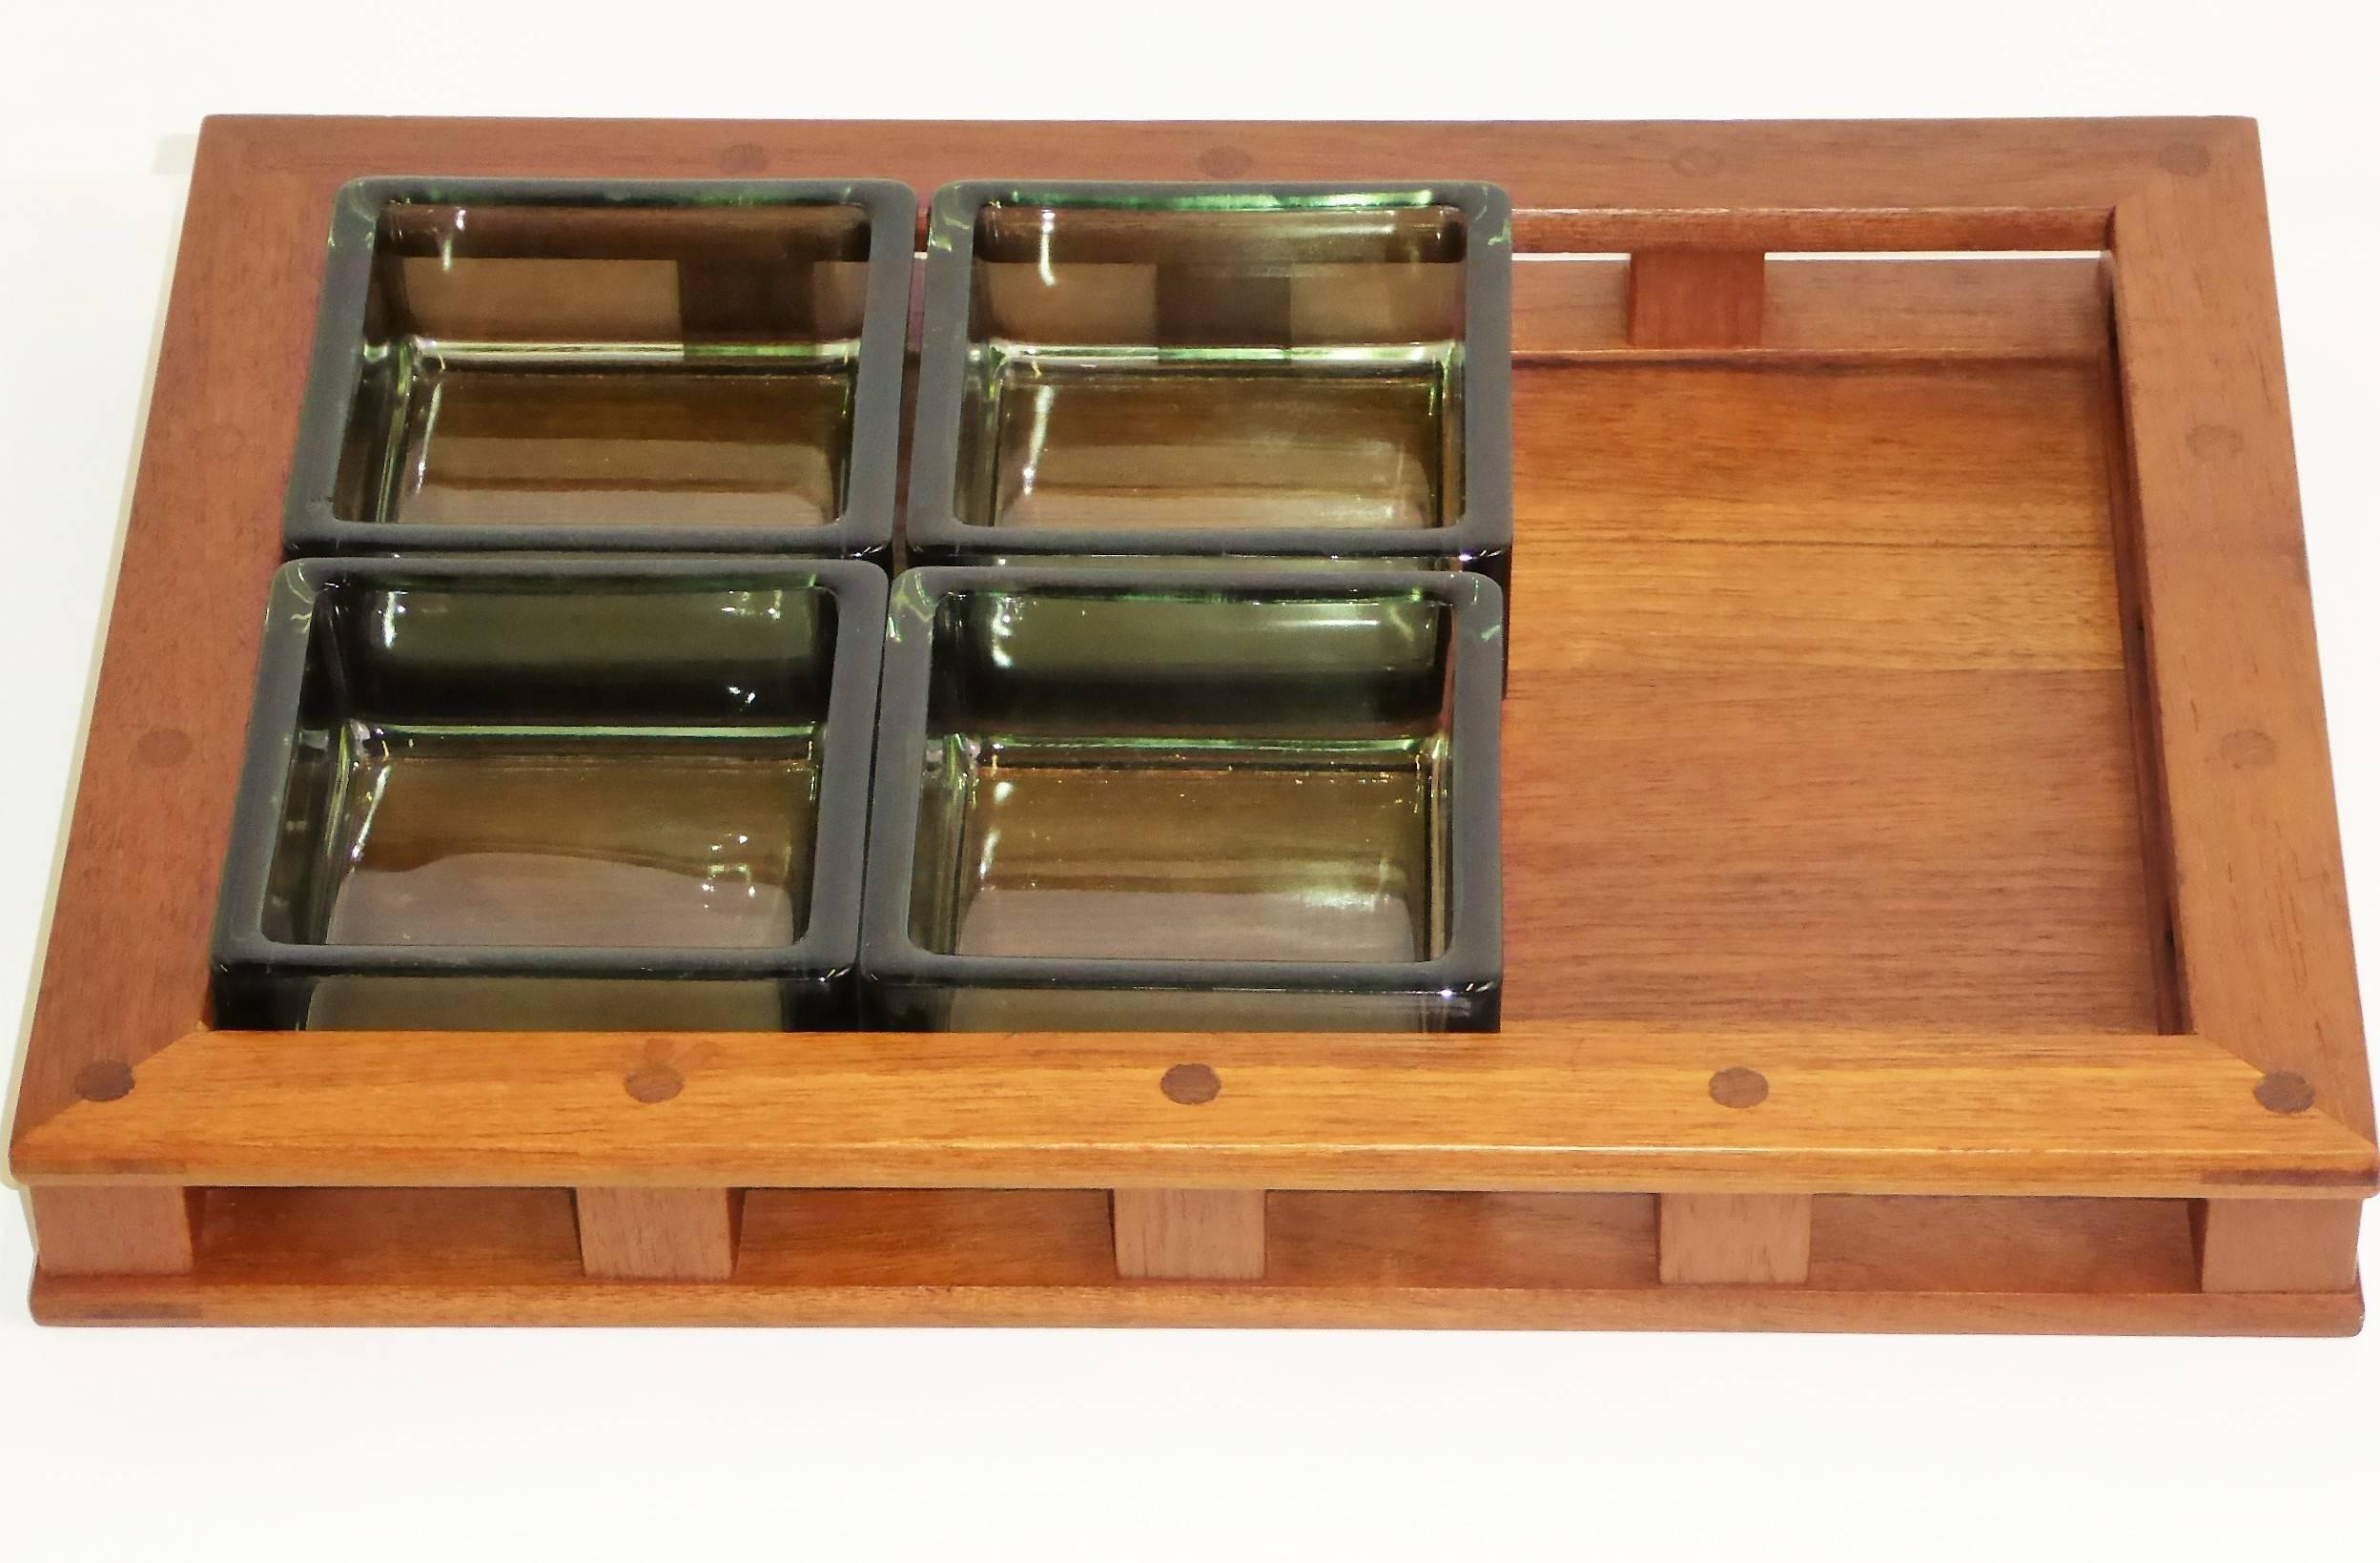 This 1960s Jens Quistgaard designed teak wood serving tray with four thick green glass inserts is from Dansk Designs and made in Denmark. The teak wood of the earlier, Danish-made pieces by Quistgaard was of a higher quality than the later pieces.